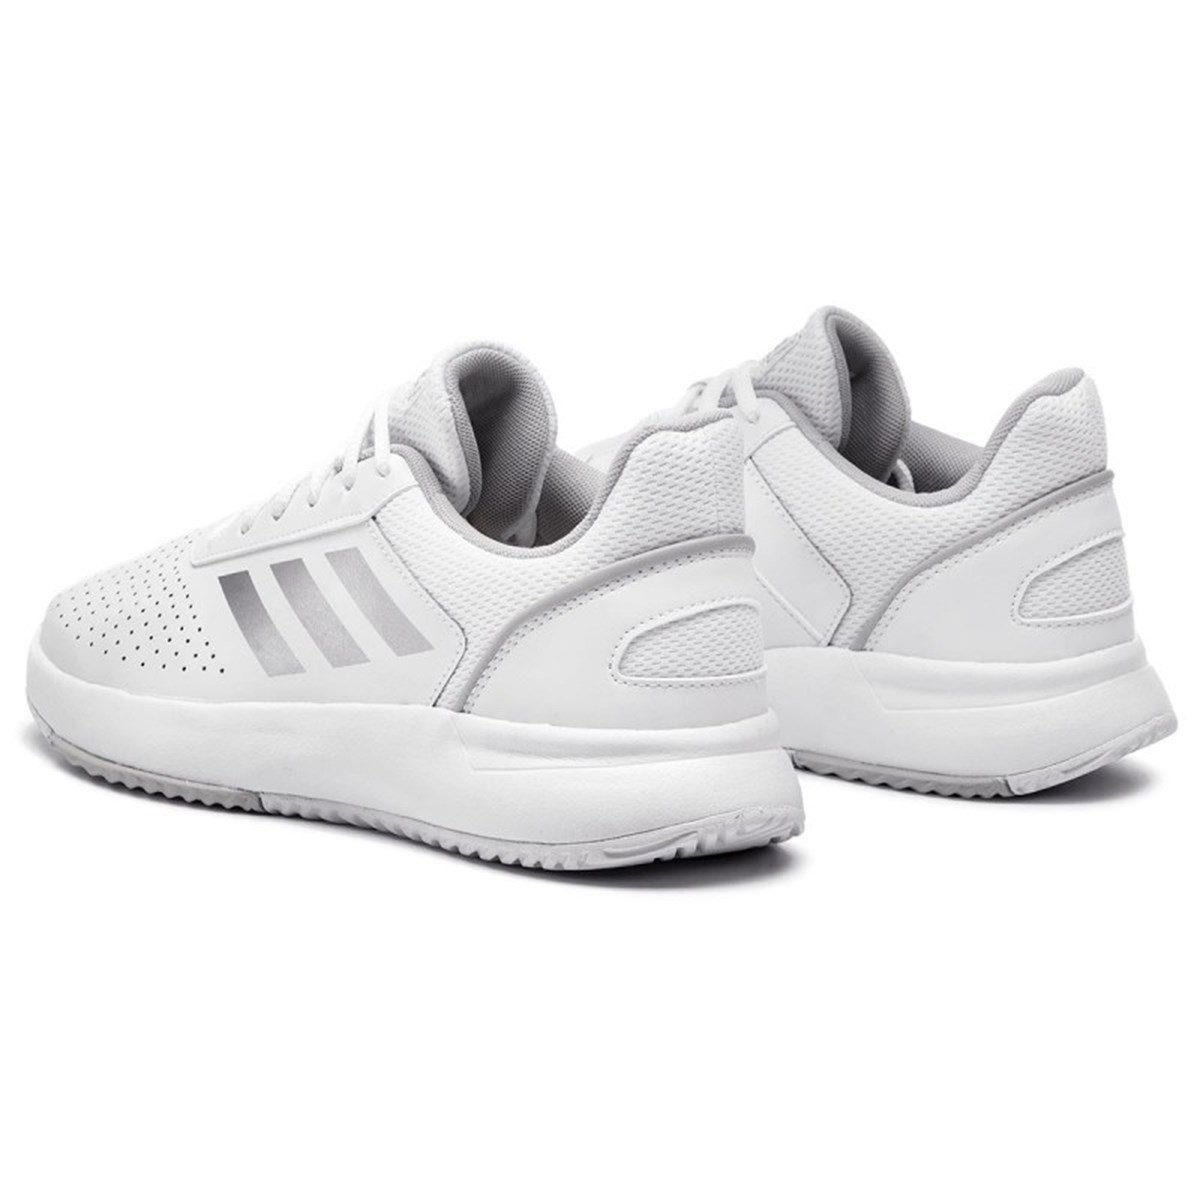 adidas F36262 COURTSMASH FTWWHT/MSILVE/GRETWO l Agsmodasi